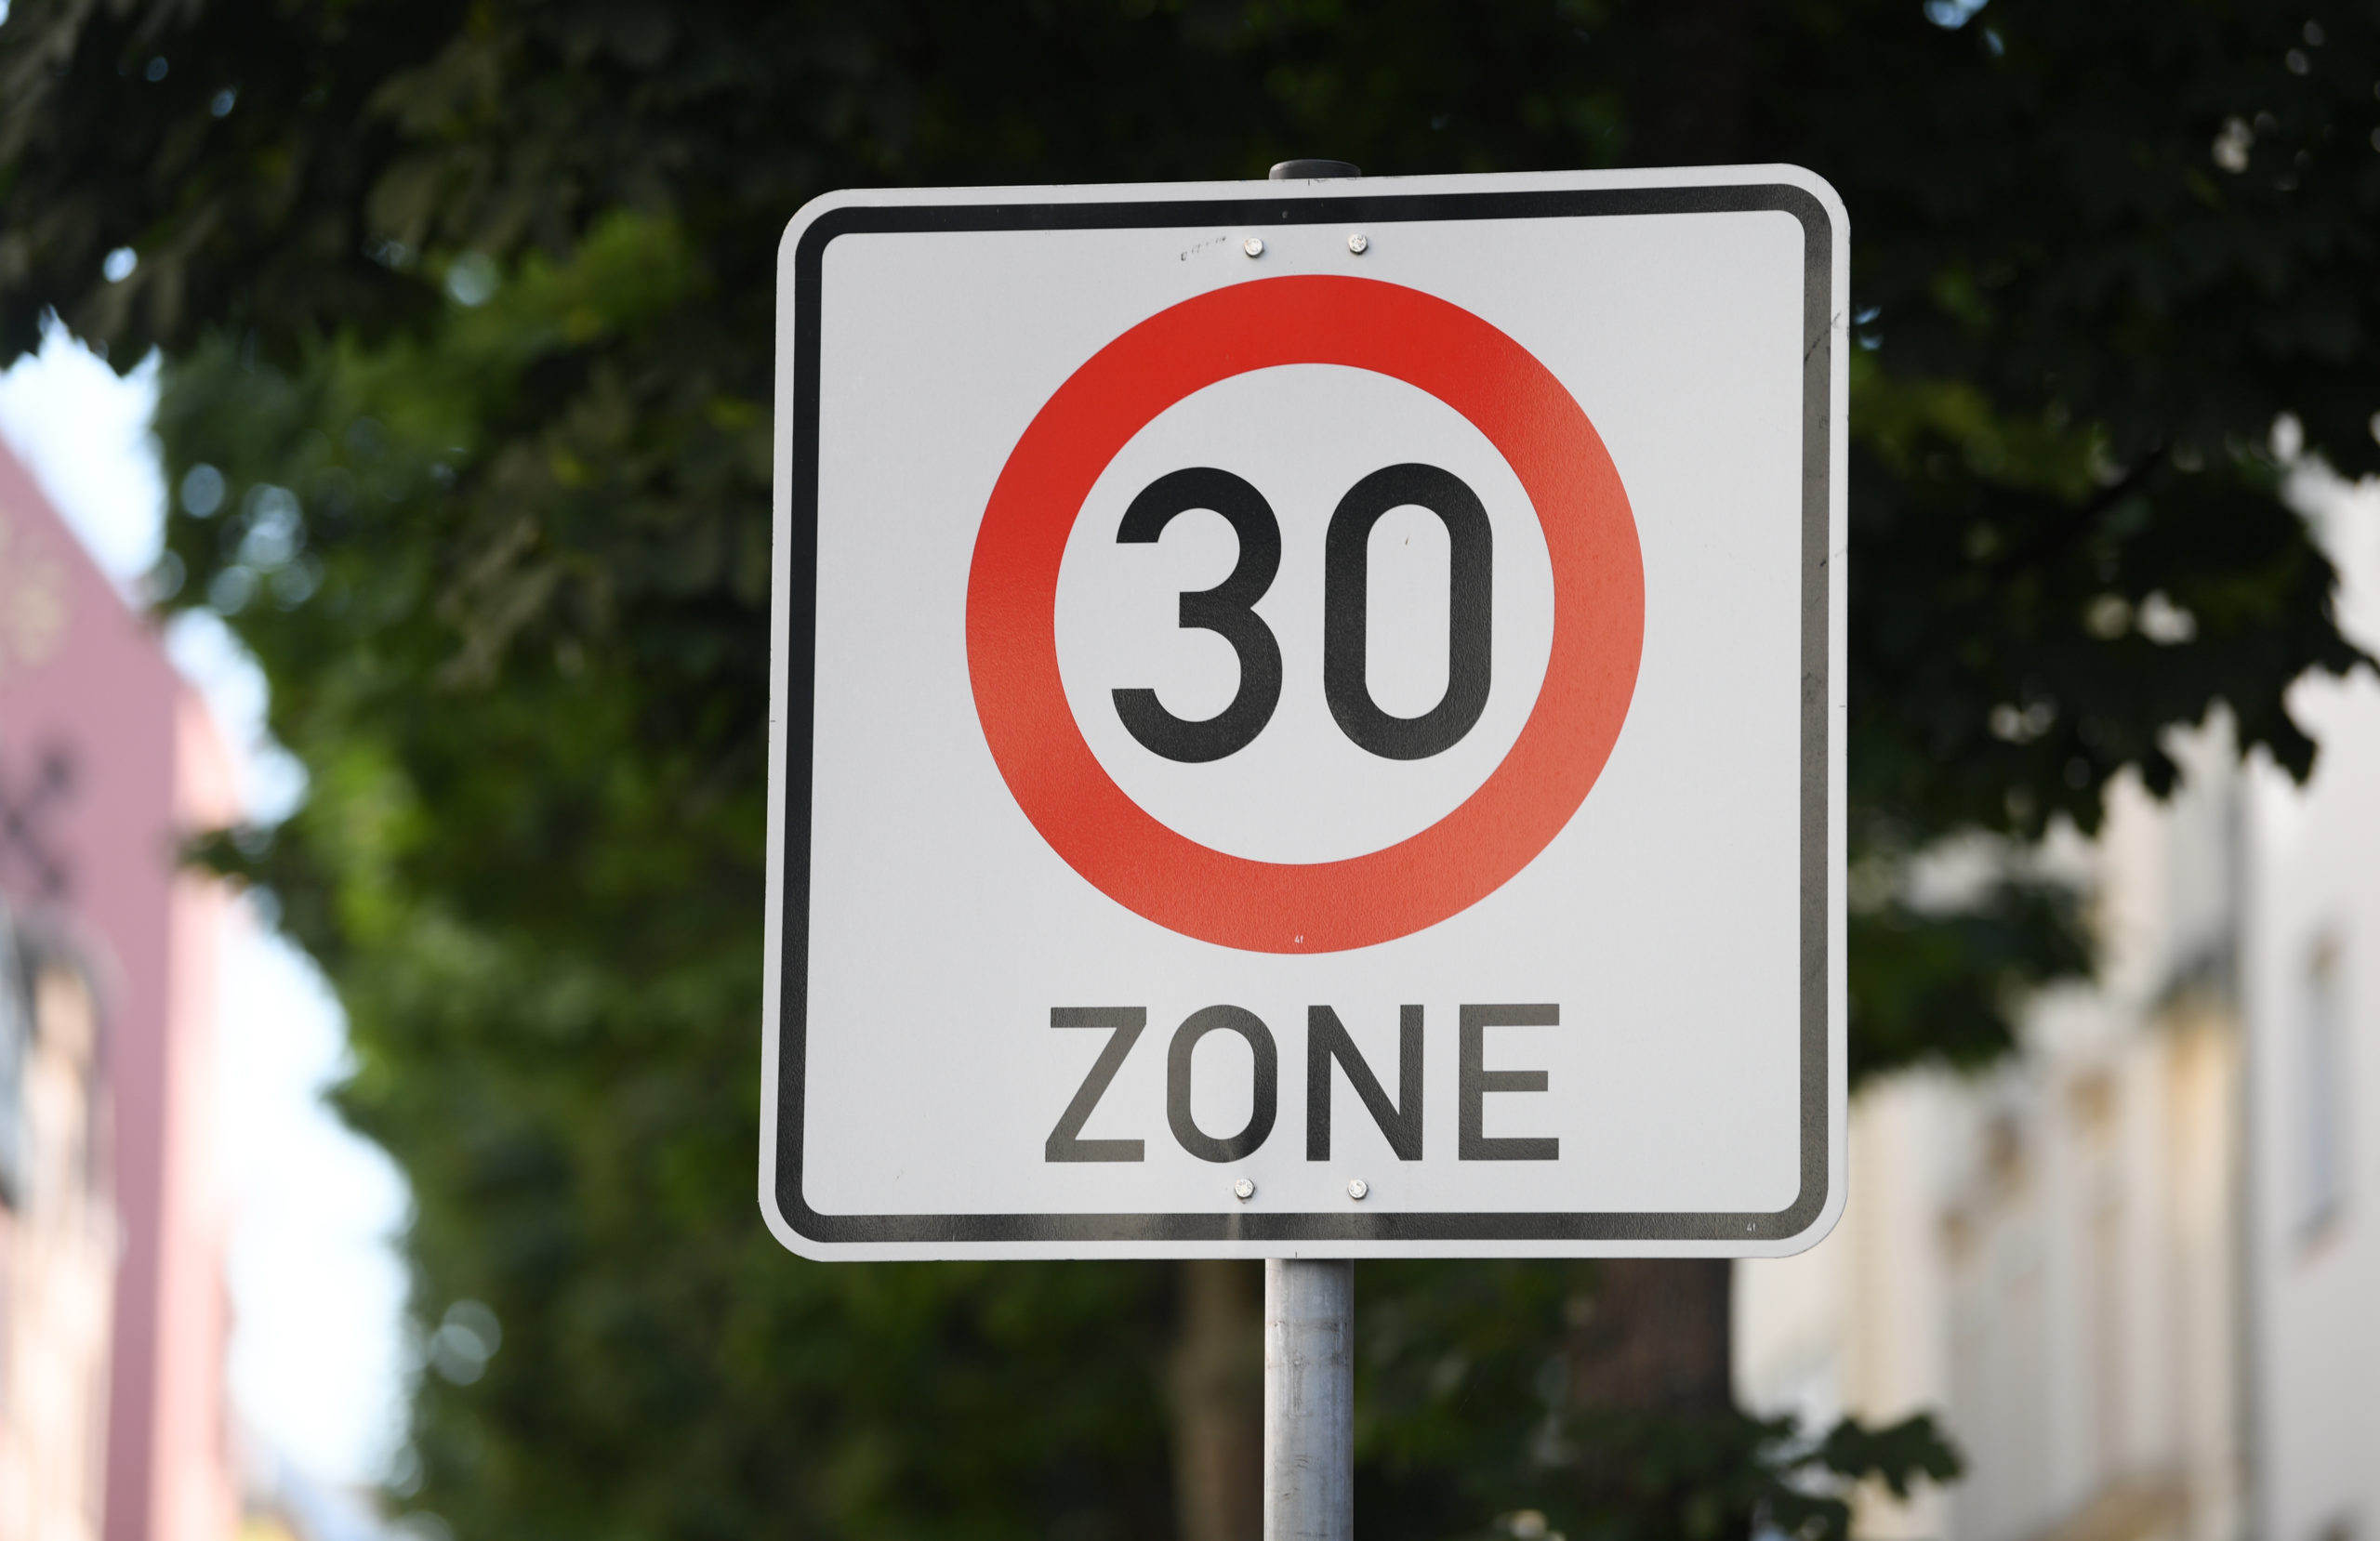 Flanders interrogates mayors about traffic ‘GAS’ fines